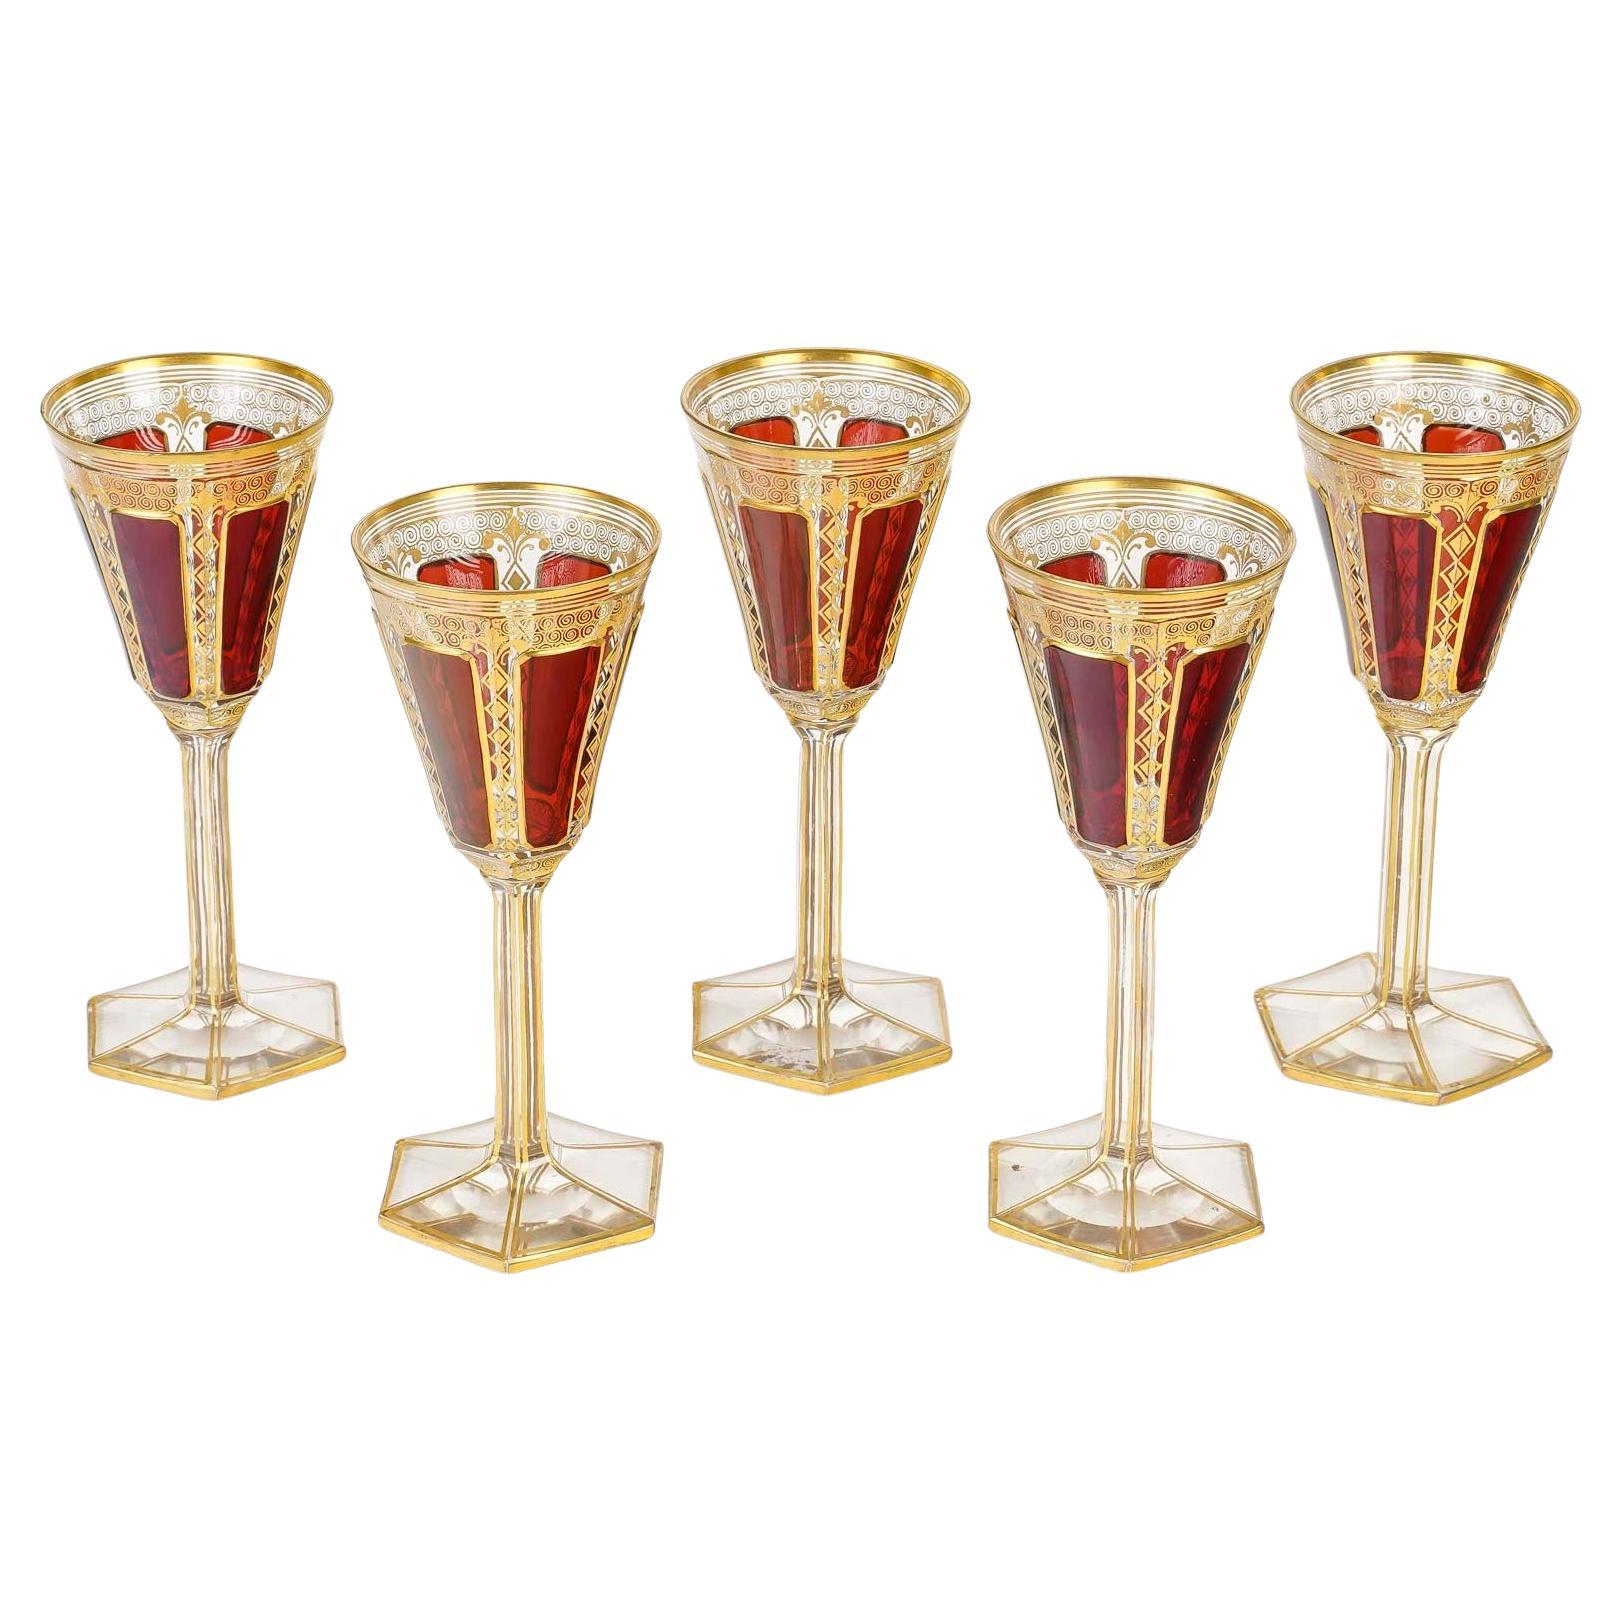 5 Bohemian Crystal Glasses, Red Cabochon, 19th Century, Napoleon III Period.